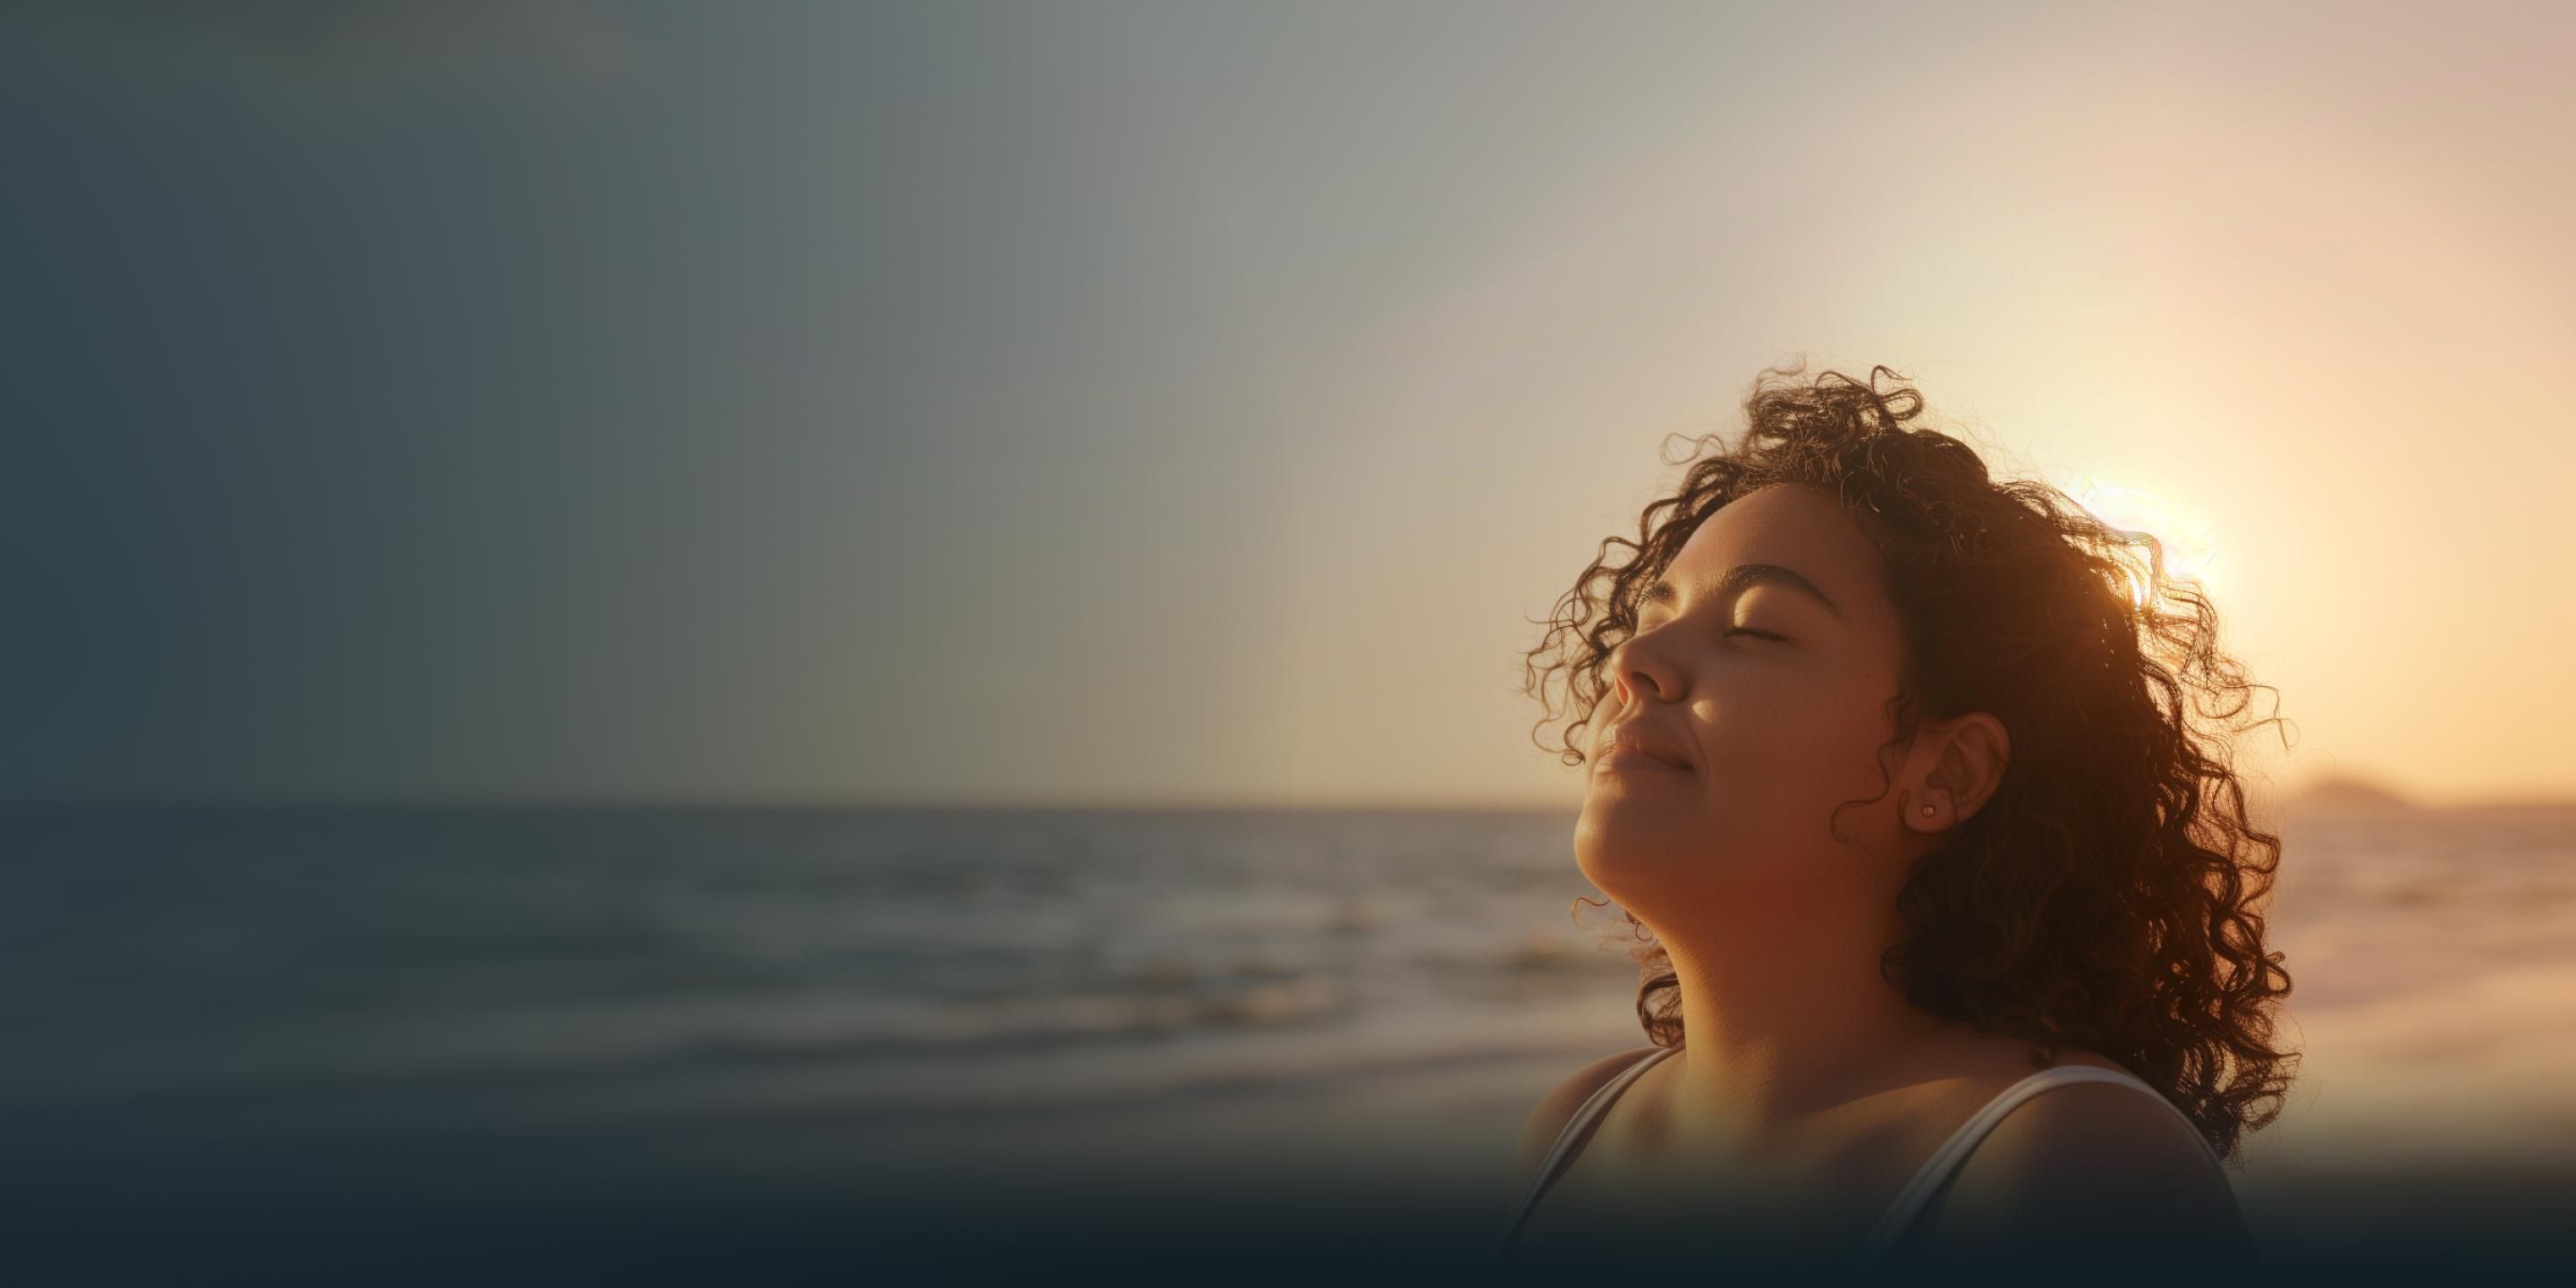 A woman with curly hair stands on a beach at sunset, eyes closed and serene.